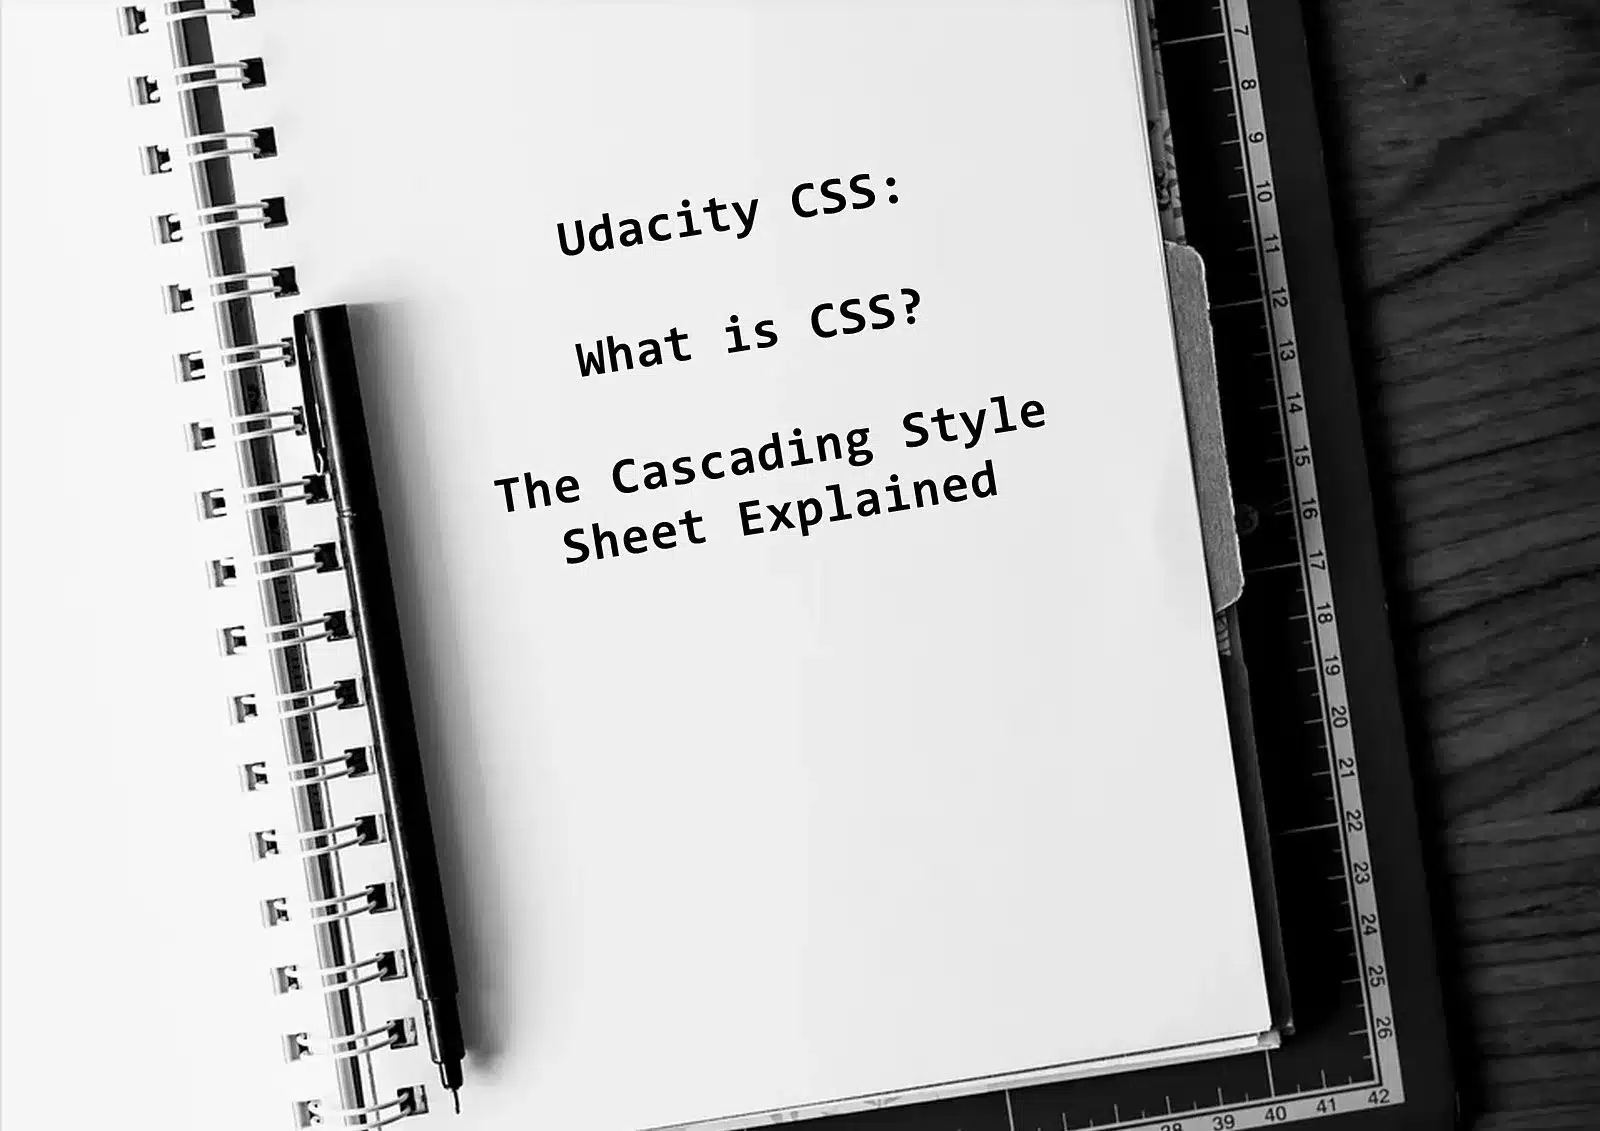 Notebook image with text asking what is CSS Cascading style sheets explained